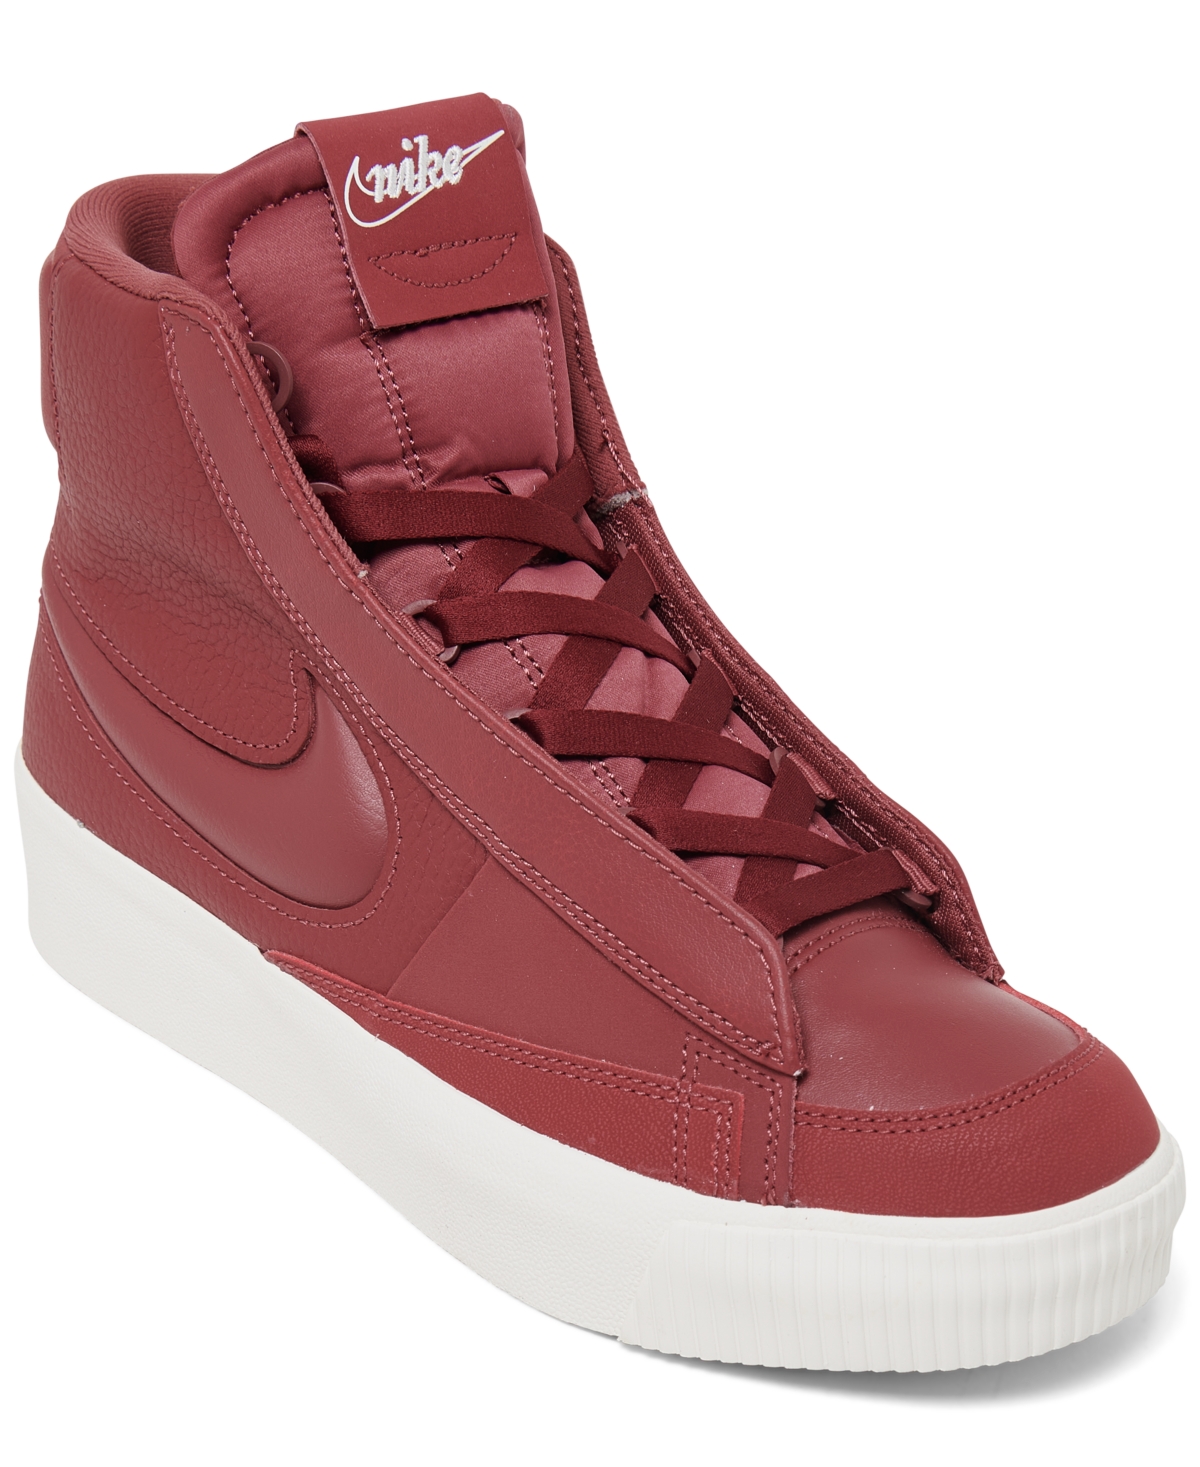 Women's Blazer Mid Victory Casual Sneakers from Finish Line - Cedar, Sail